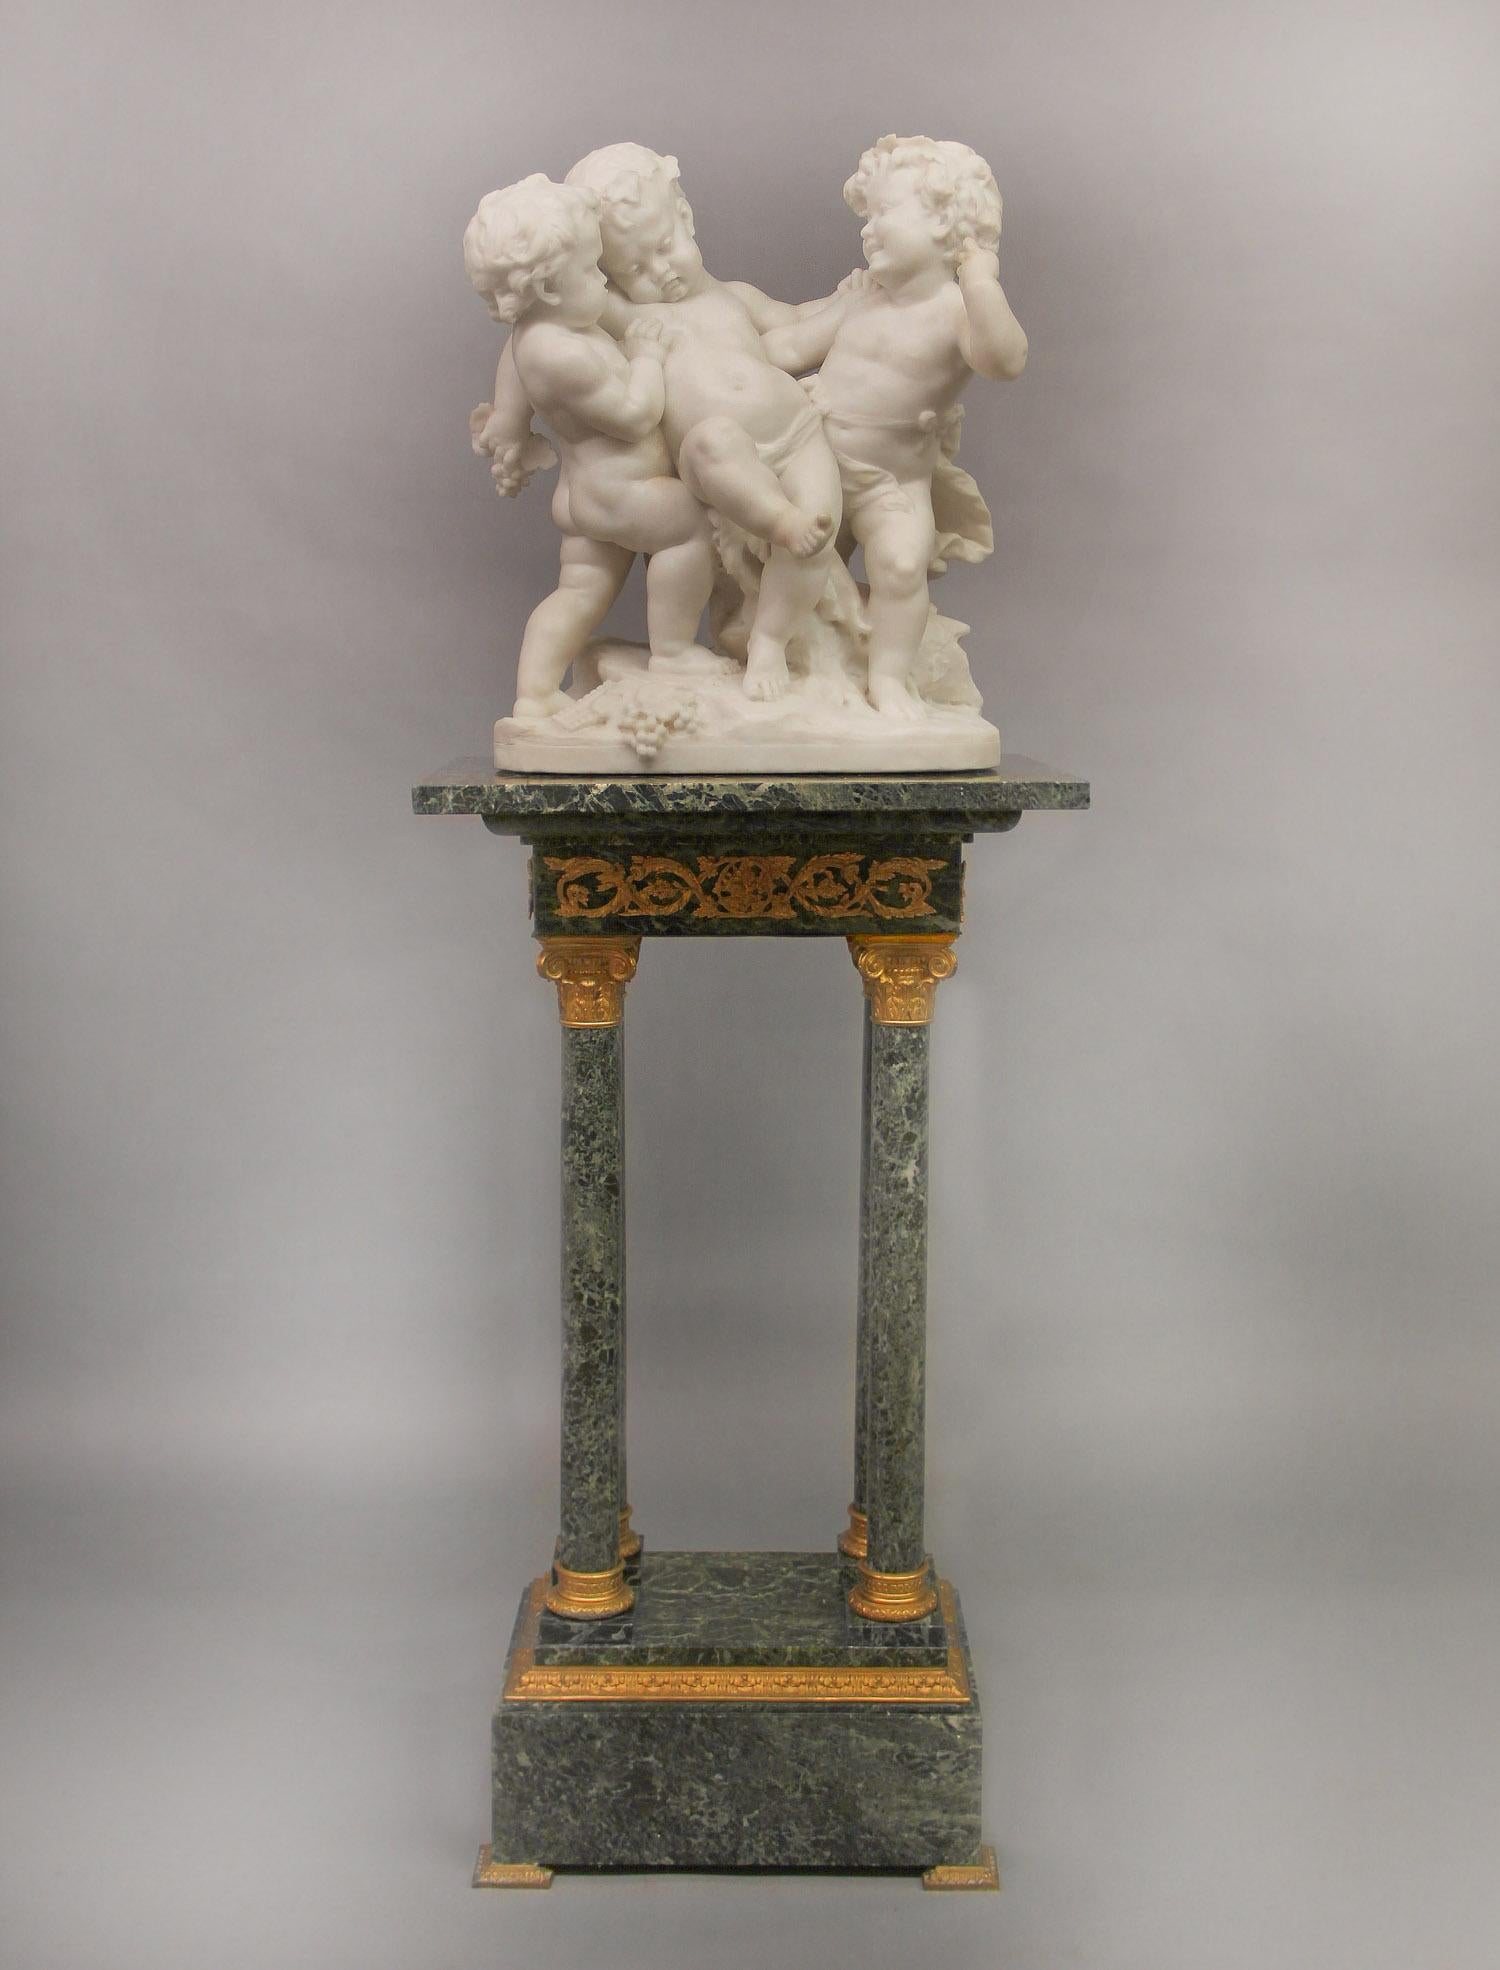 A Nice late 19th century Carrara marble figural group of Drunken Silenus by Rougelet

Depicting three putti, with Silenus being held aloft, surrounded by grapes.

Inscribed Rougelet to the base.

Bénédict Benoit Rougelet (1834 –